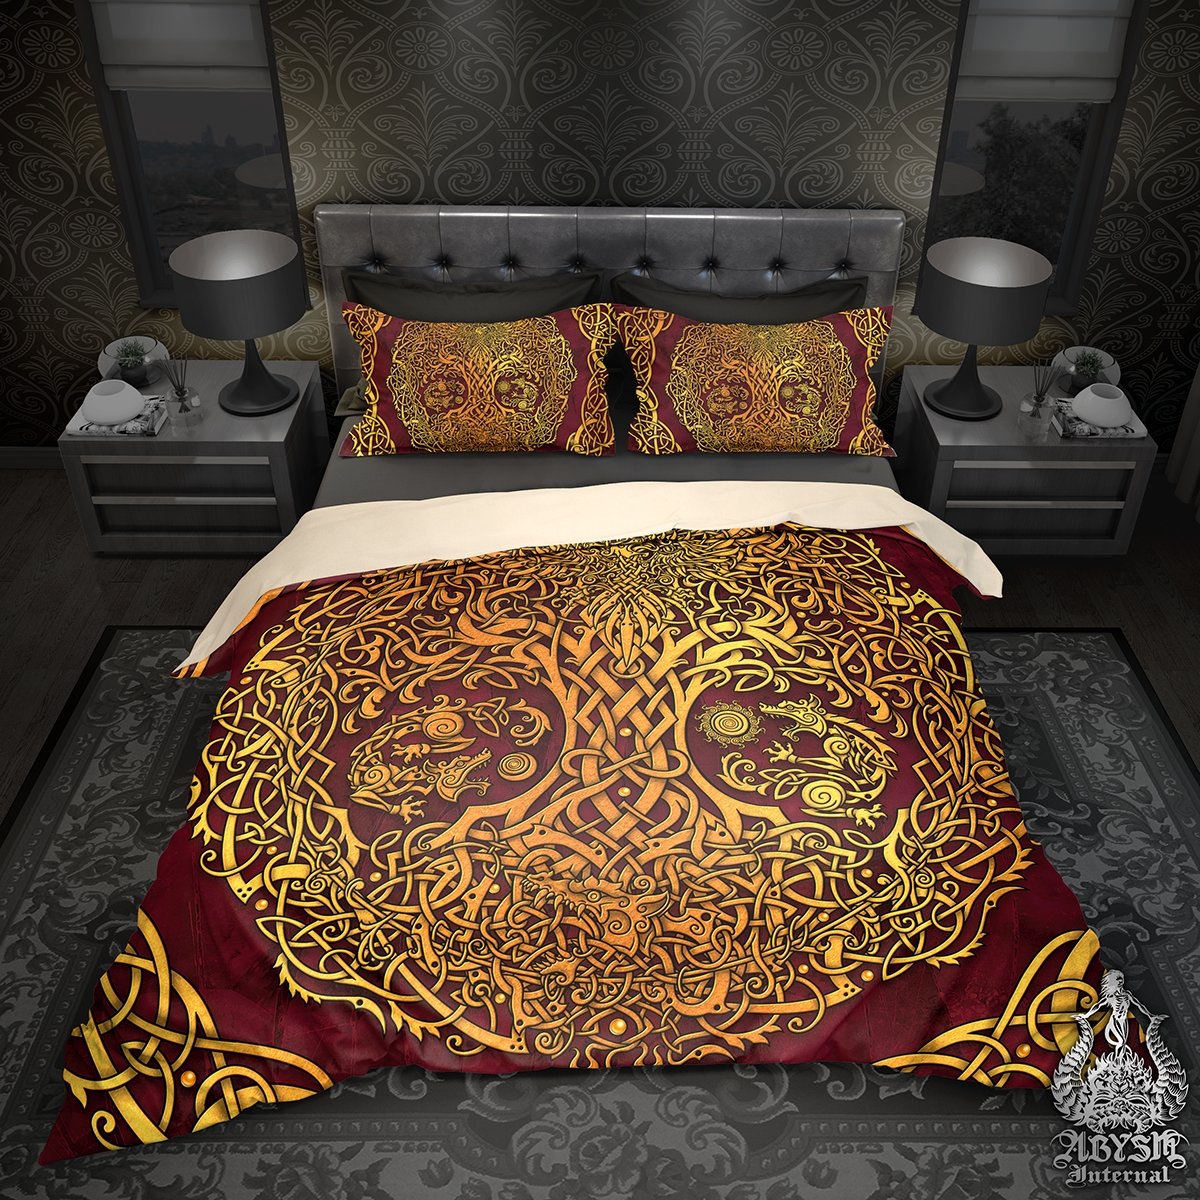 Yggdrasil Bedding Set, Comforter and Duvet, Viking Tree of Life, Norse Bed Cover and Bedroom Decor, King, Queen and Twin Size - Gold and Red - Abysm Internal